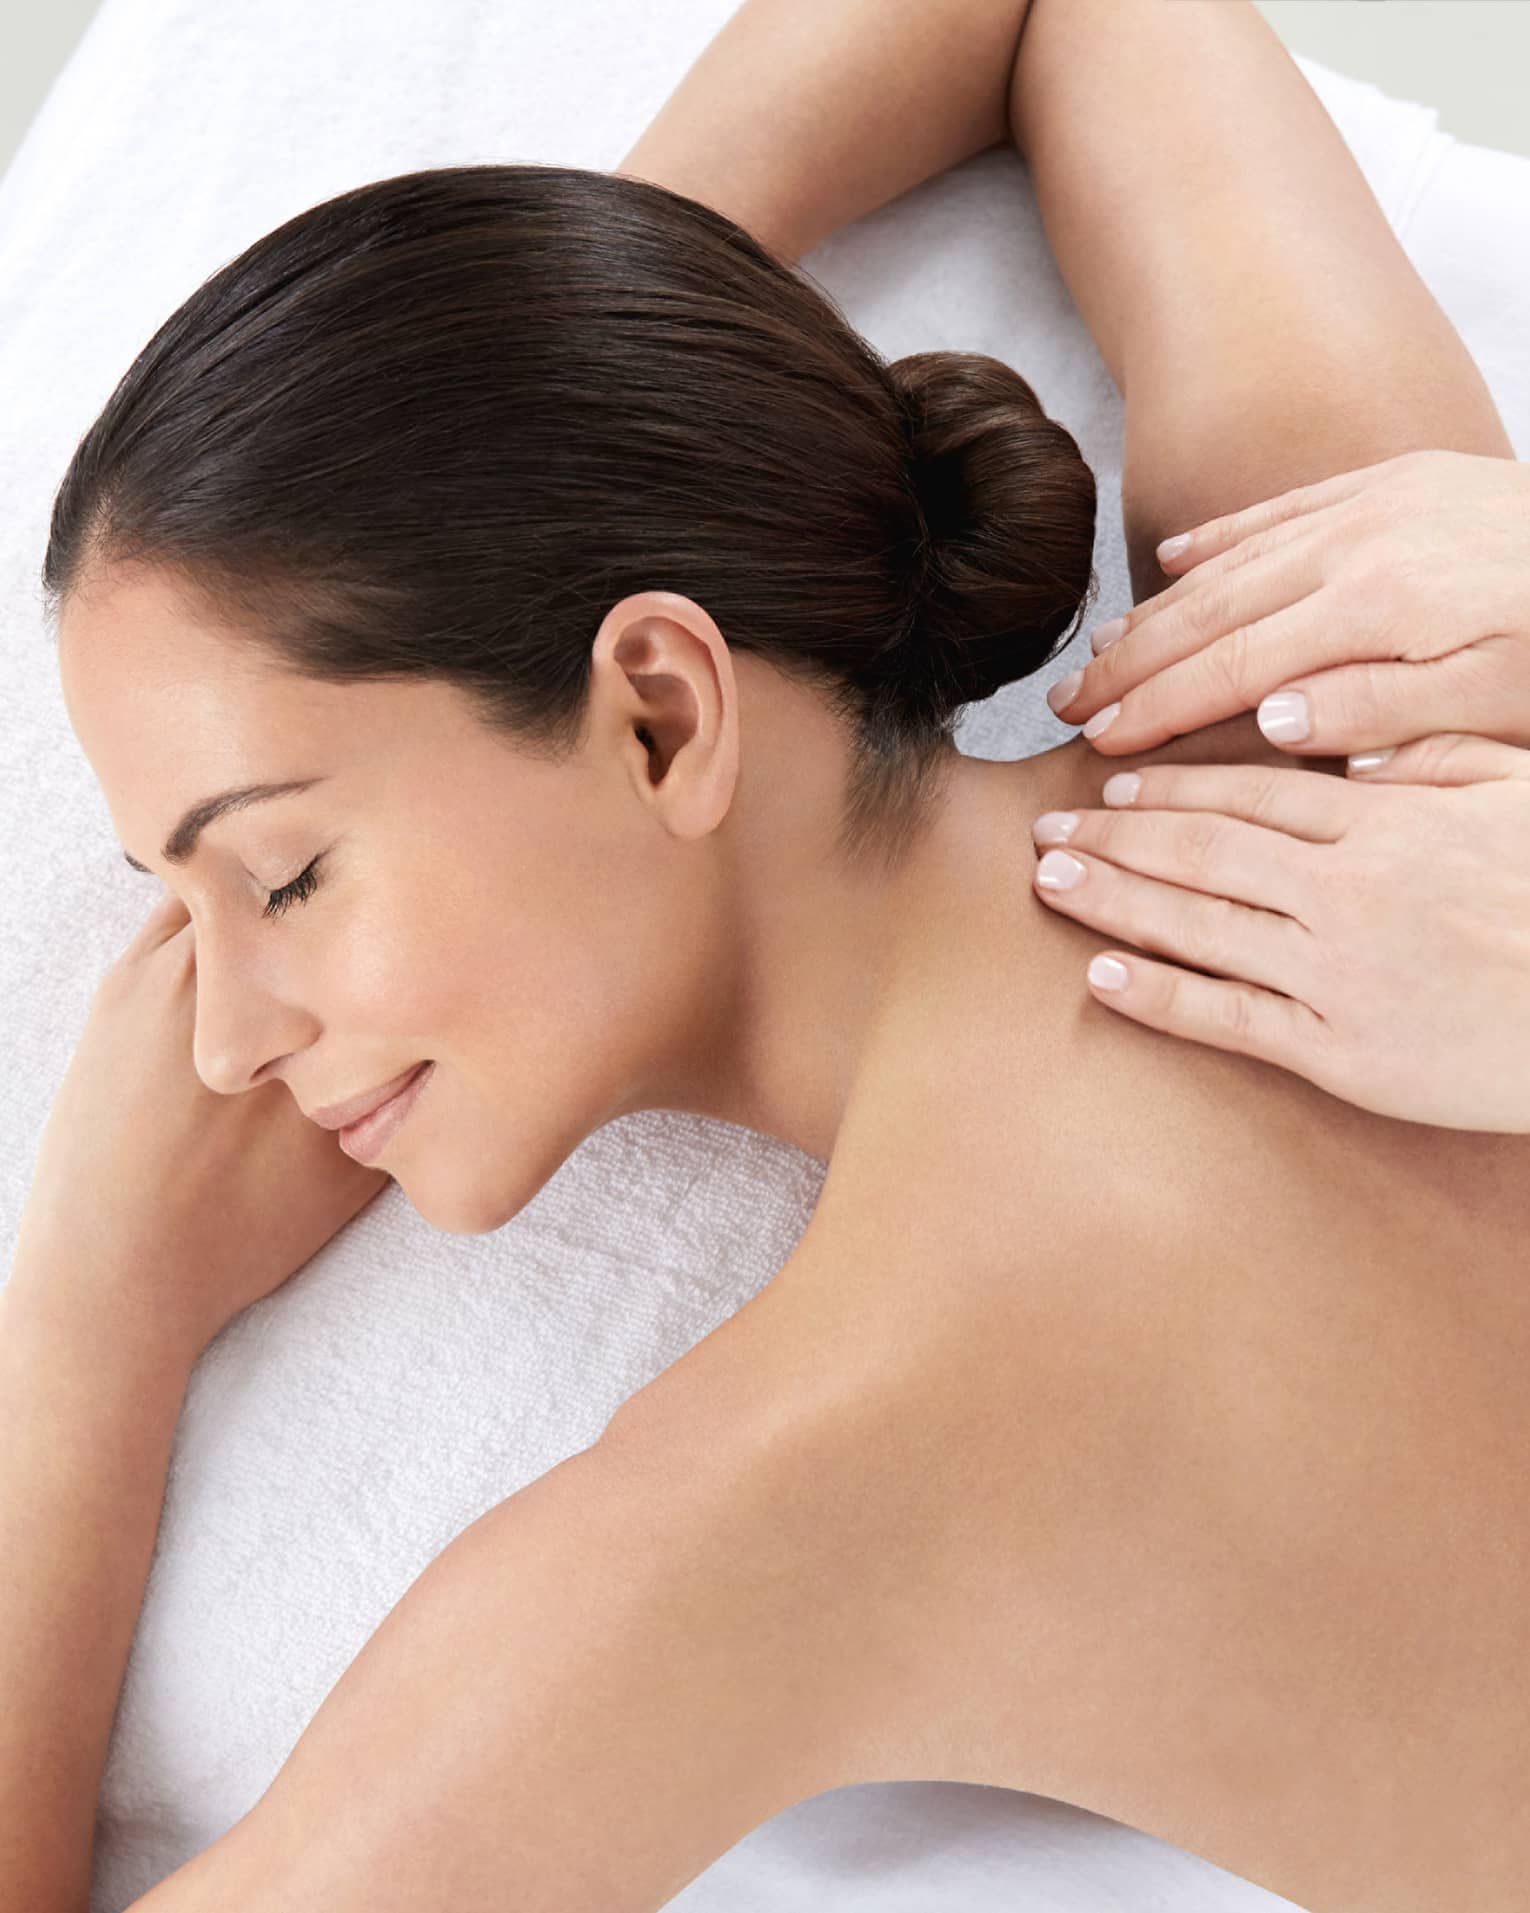 Woman smiles, lies on massage table as hands massage bare shoulders